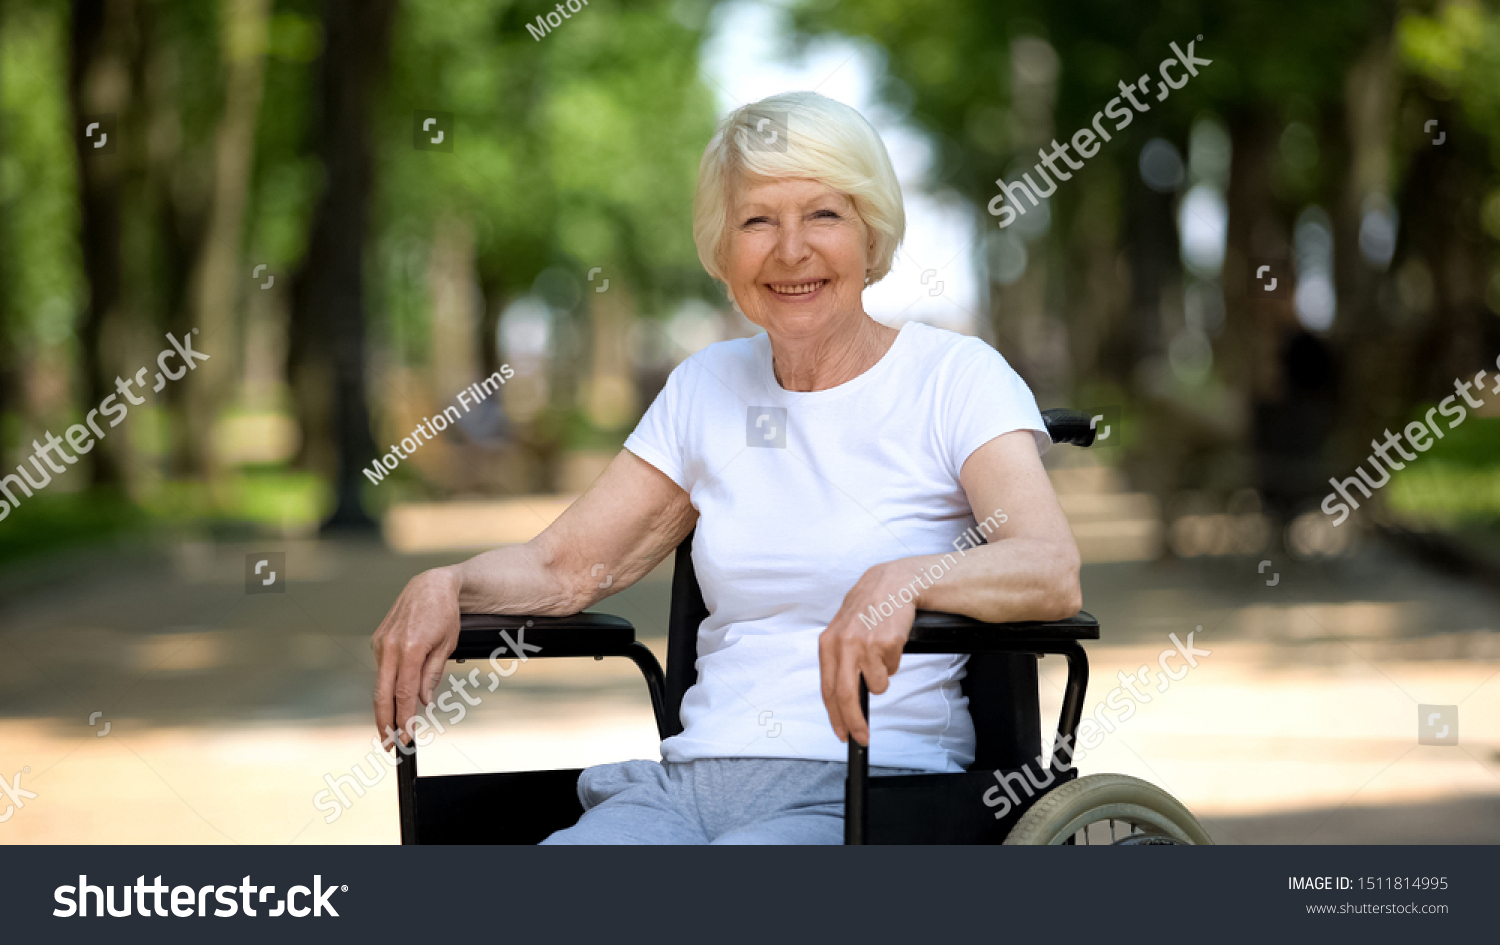 Smiling elderly woman in wheelchair looking into camera, sunny day in park #1511814995